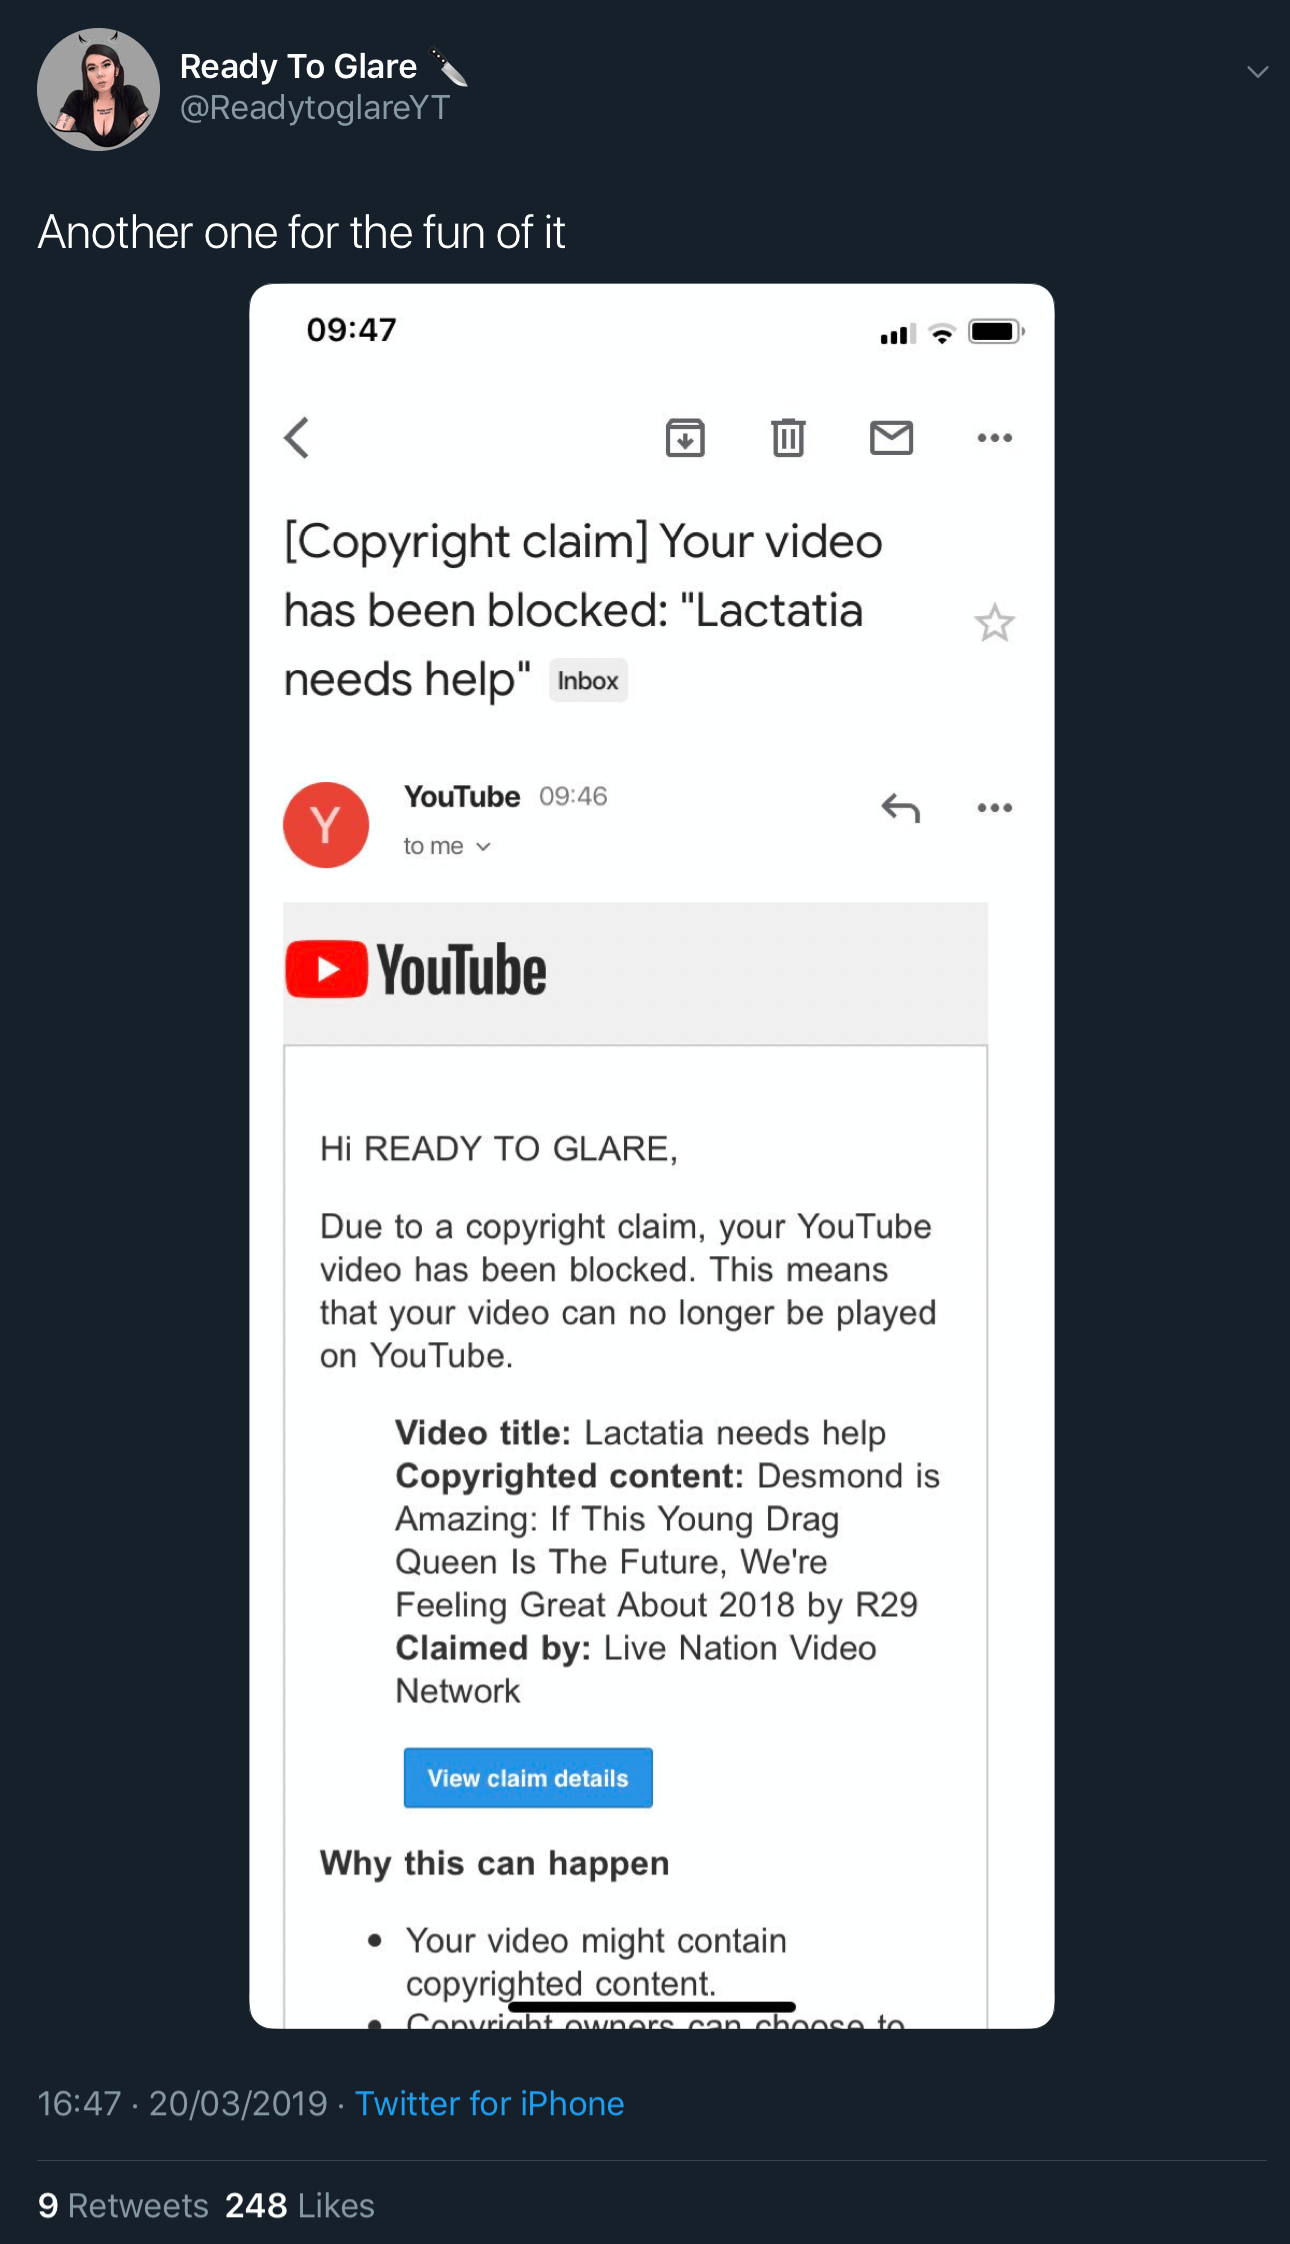 A tweet showing the second fake YouTube copyright claim against Ready To Glare for her video titled “Lactatia Needs Help.”